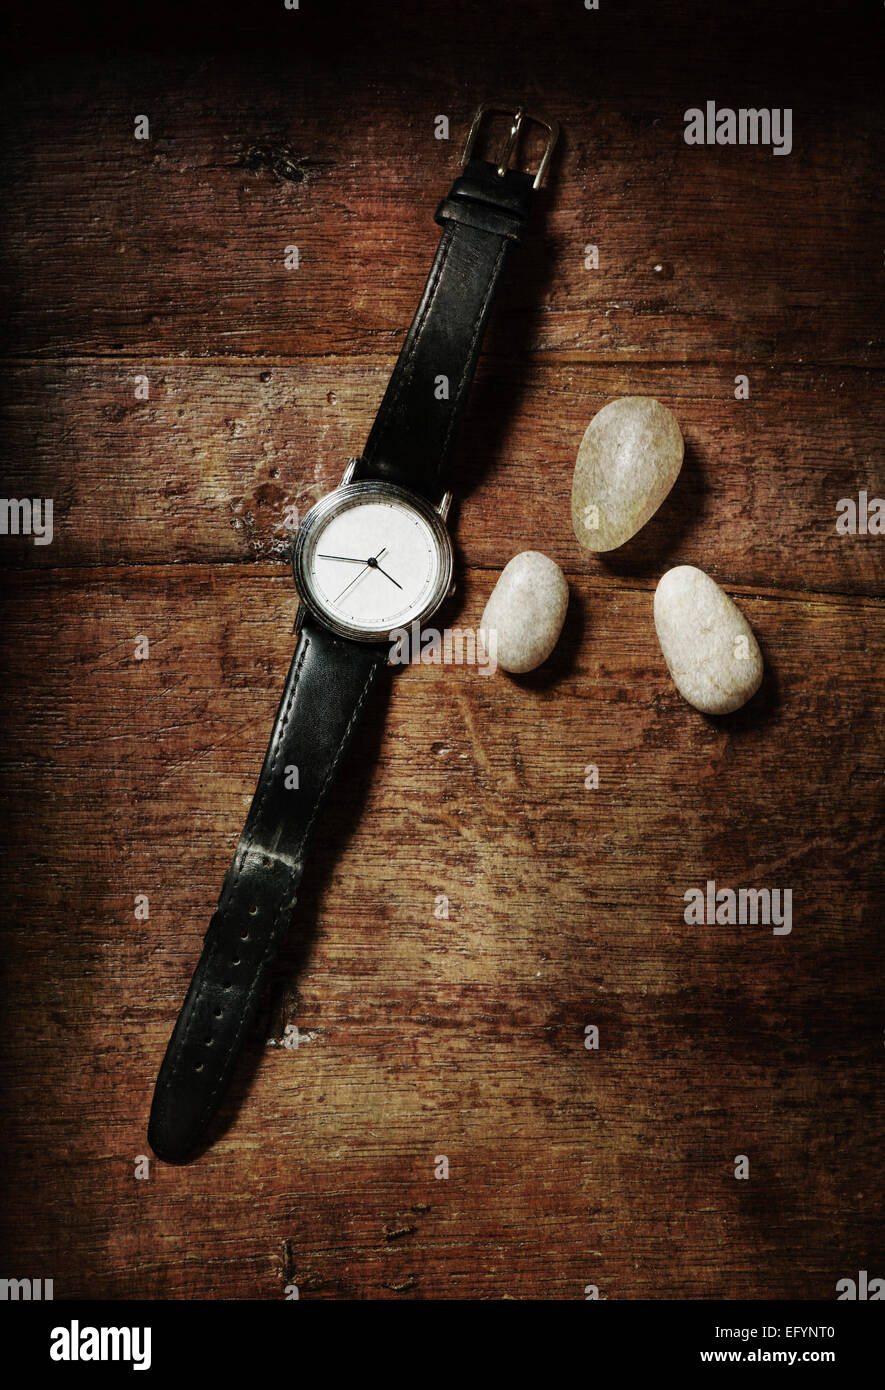 Still life with wrist watch and three stones on wooden table. Top view. Stock Photo